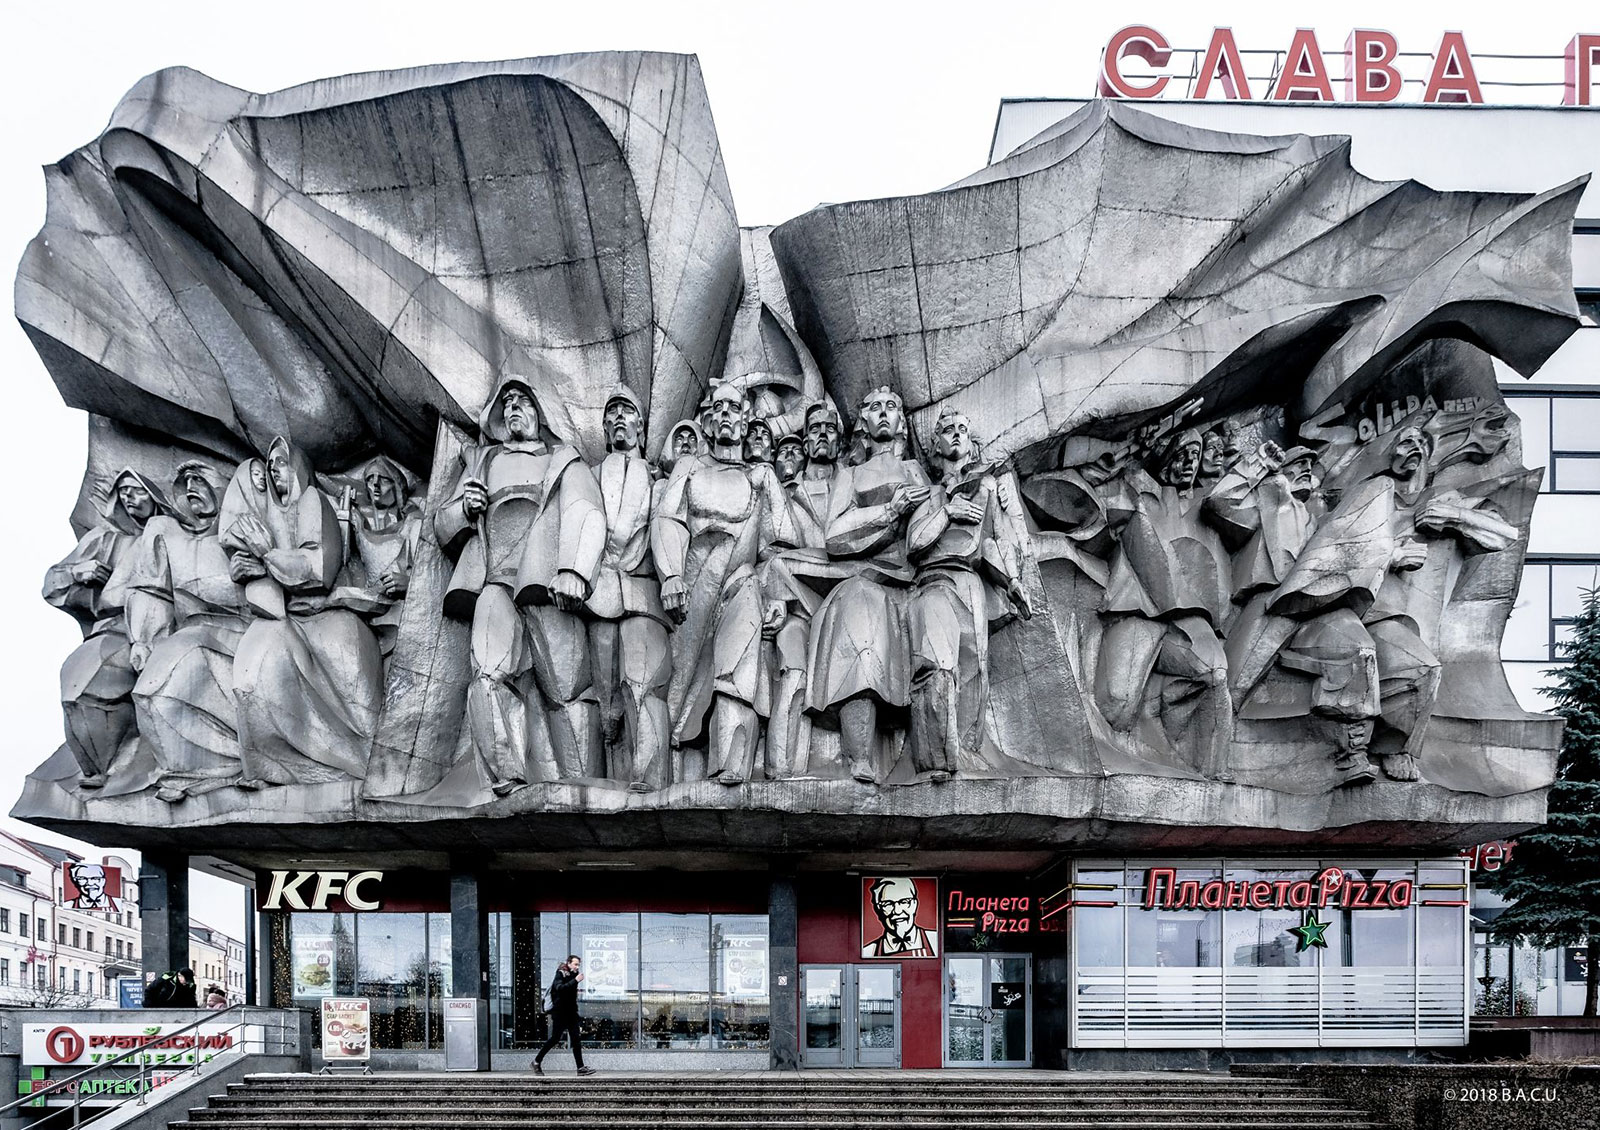 Socialist modernist gems from Tirana to Tashkent are under threat. These activists are trying to save them